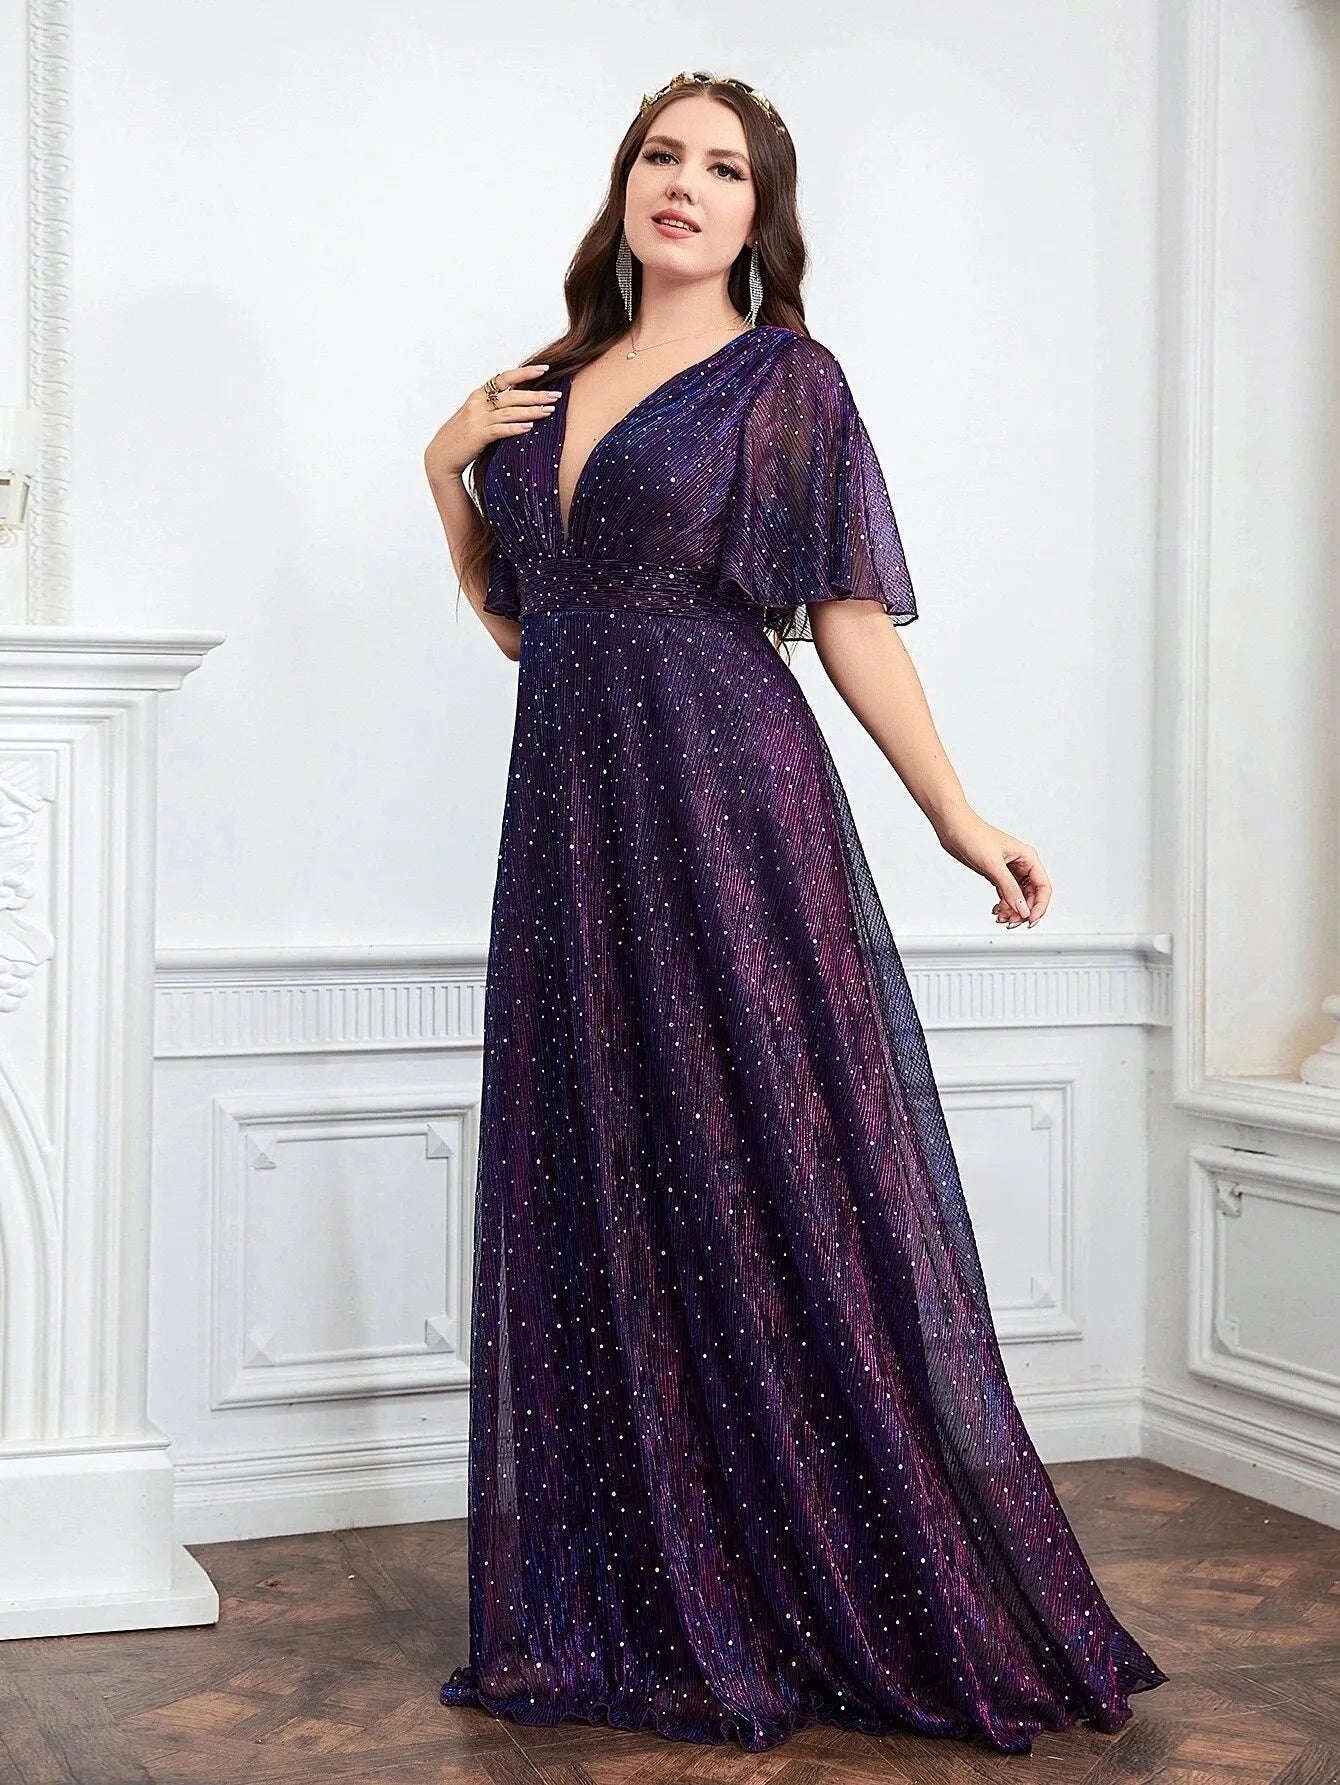 Plus Size Wedding Guest Bridesmaid Sequin Dress For Women Plunging Neck Butterfly Sleeve Glitter Prom Party Dresses